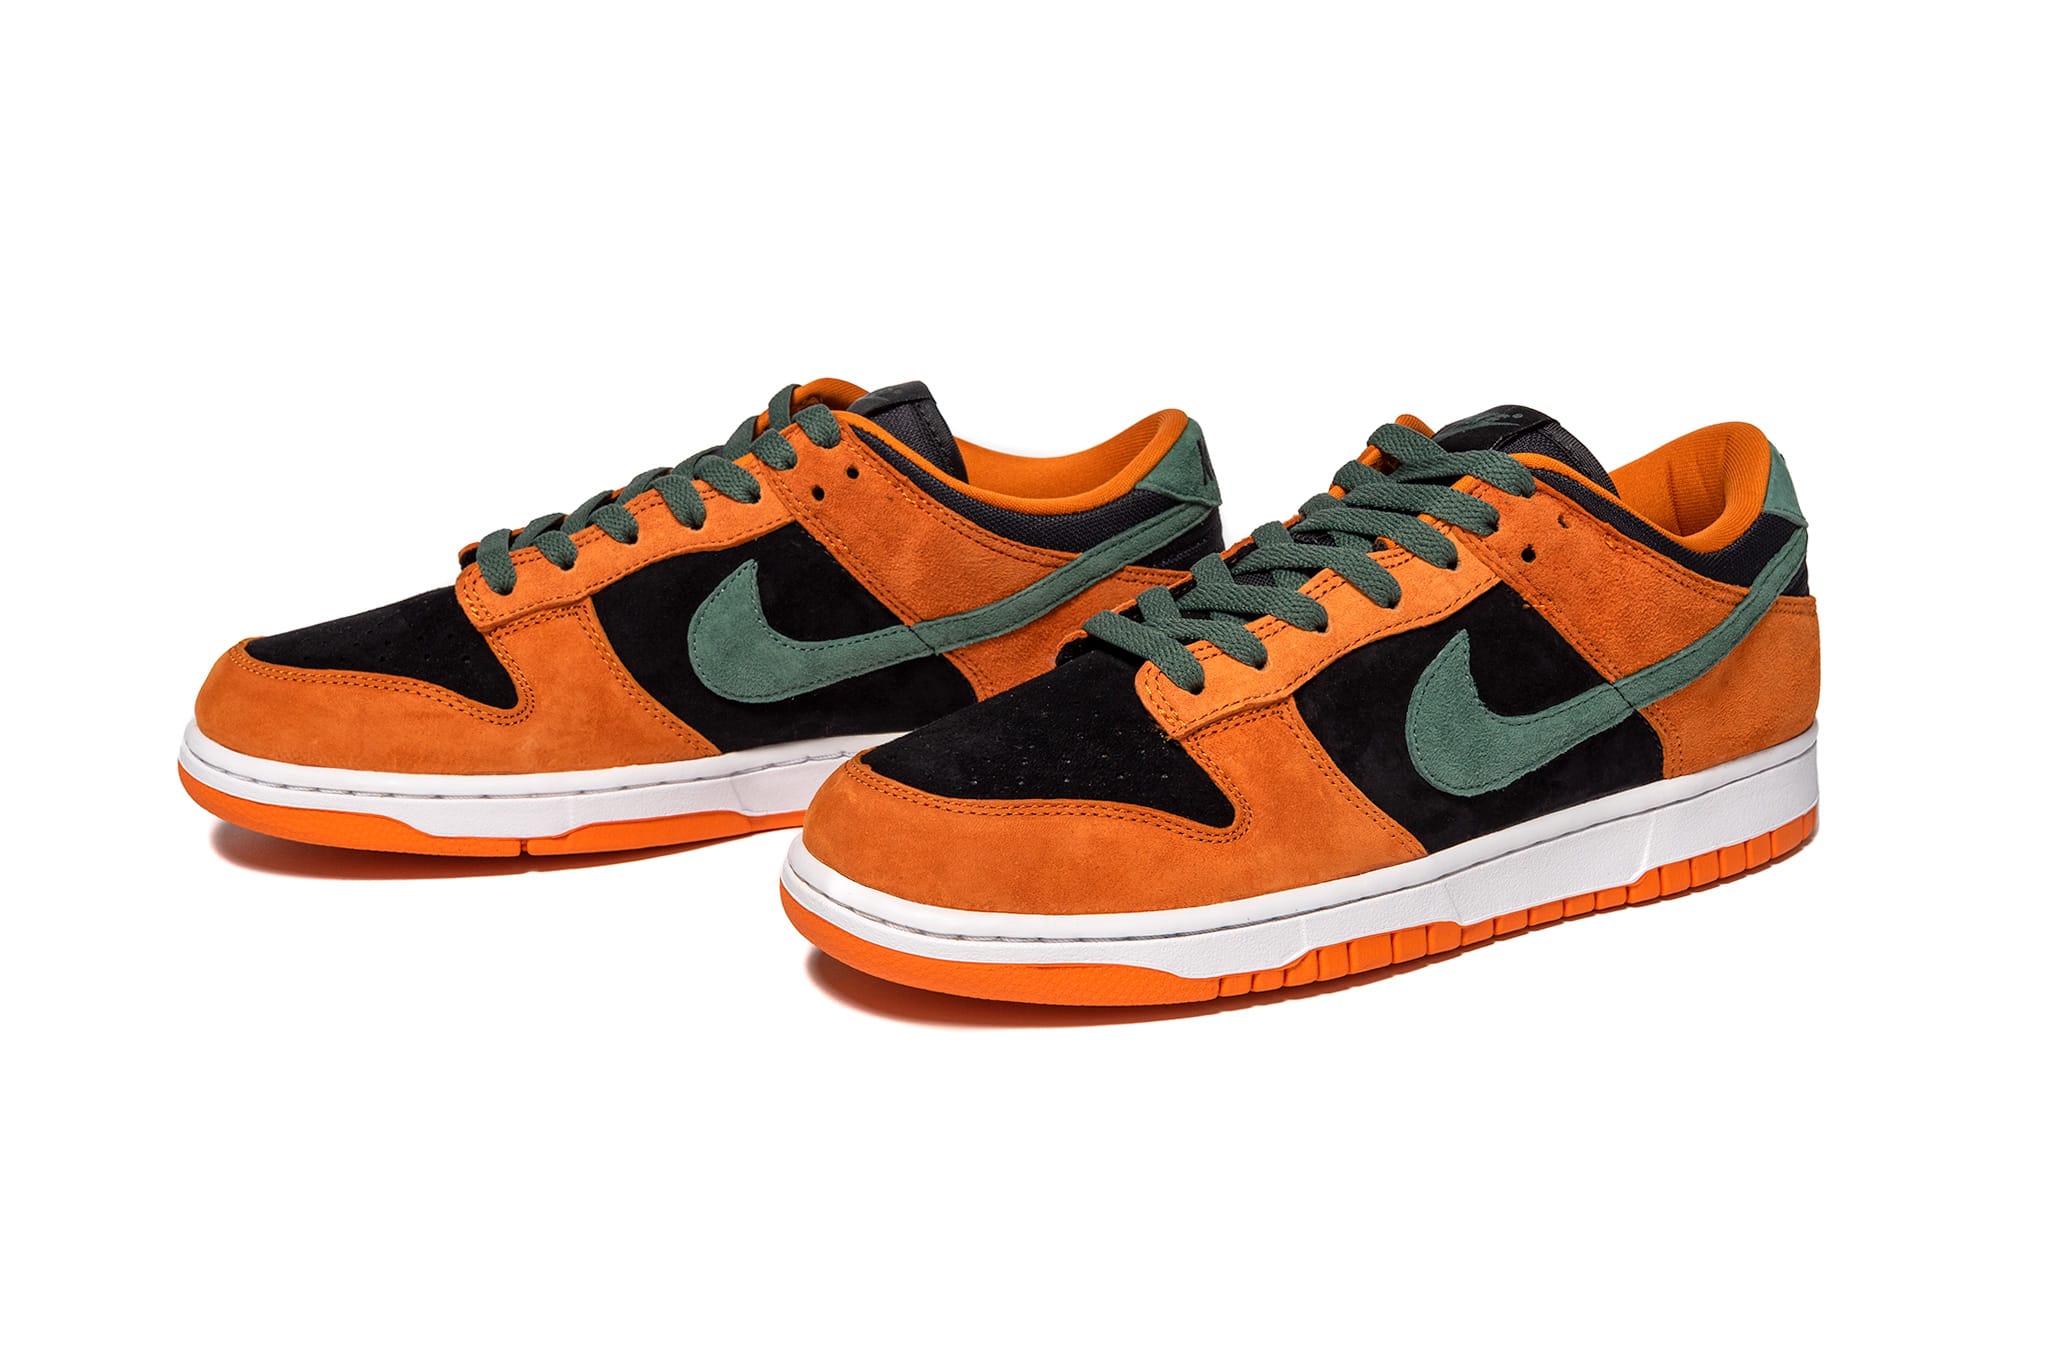 Nike Dunk Low SP “Ceramic” | Release Date: 11.19.20 | HAVEN